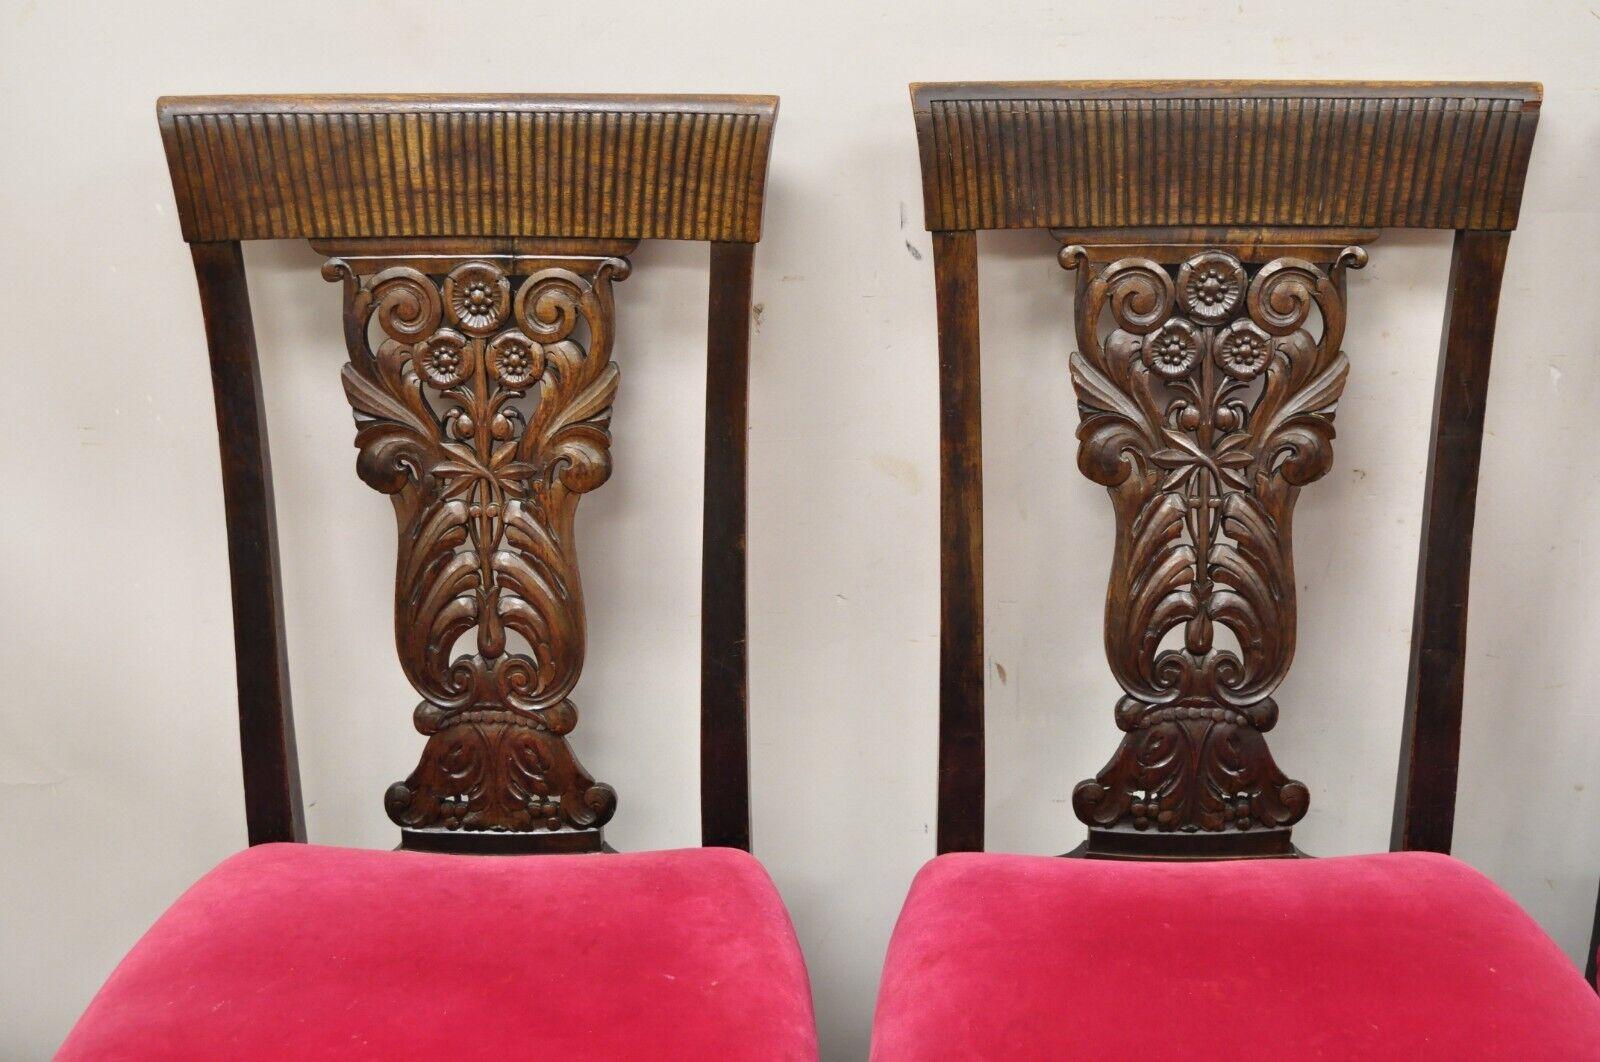 Antique Edwardian Floral Carved Mahogany Red Mohair Dining Chairs - Set of 4 In Good Condition For Sale In Philadelphia, PA